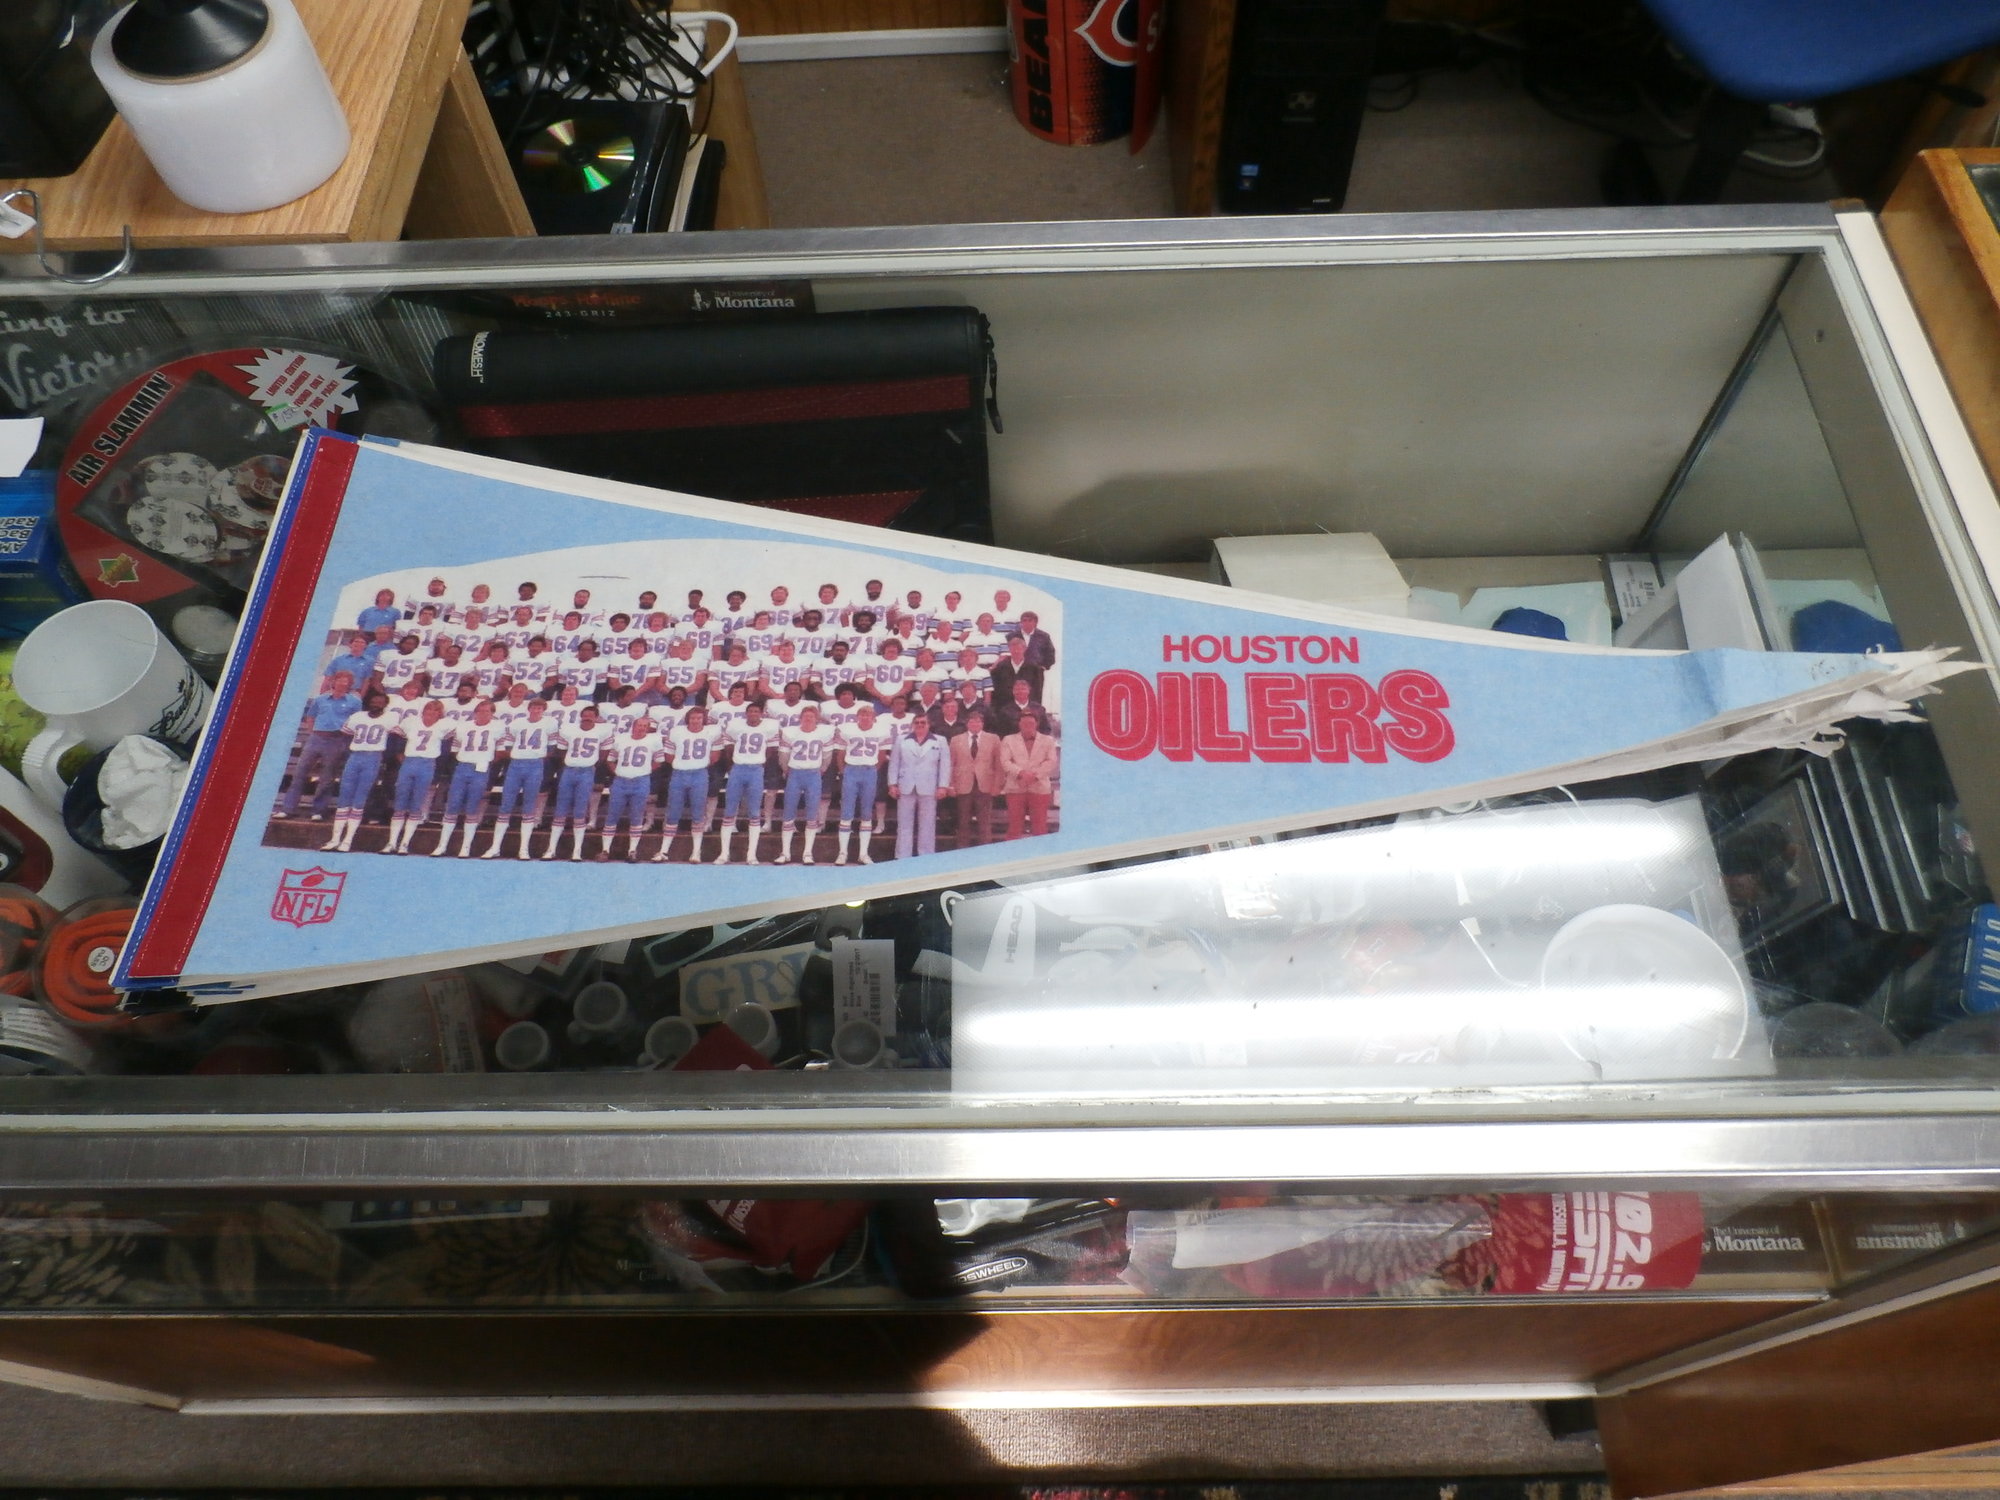 Houston Oilers NFL Pennant 30\" x 12\" Vintage Style Team Photo # 19012
Rating: (see below)- 3 - Good Condition
Team: Houston Oilers
Player: Team Photo
Brand: NFL
Size: (Measured flat: Height: 12\"; length: 30\")
Color: Light Blue with Red accents
Style: Pennant;
Material: Unknown
Condition: 3- Good Condition: wrinkled; minor Fuzz; the corner at the end is wrinkled and curled up; small pin holes on the corners from hanging
Item # 19012
Shipping: FREE